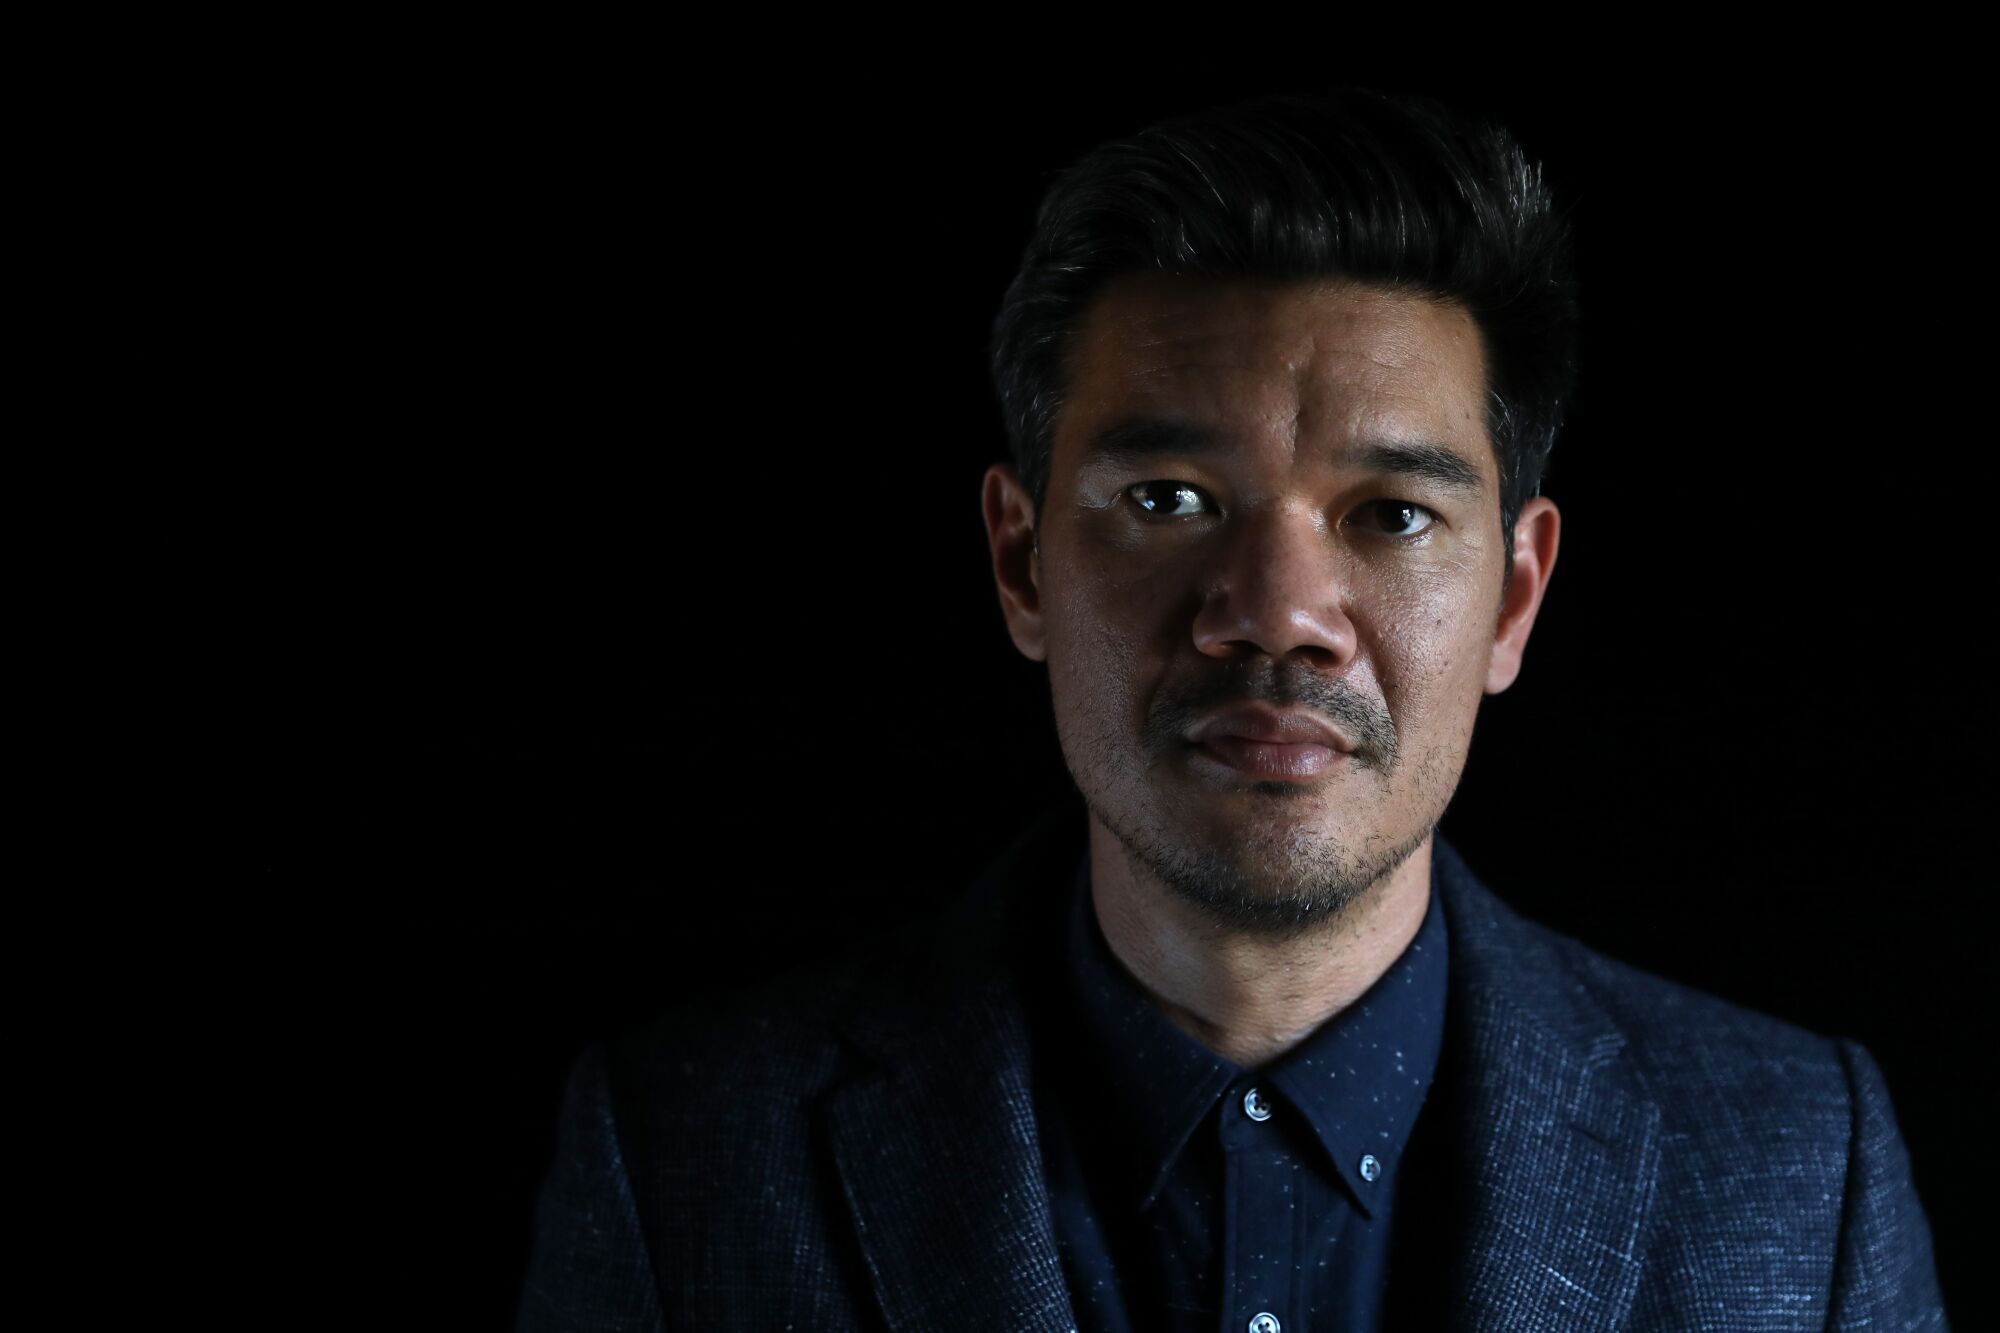 Destin Daniel Cretton is the director of Marvel's next superhero film, "Shang-Chi and the Legend of the Ten Rings."